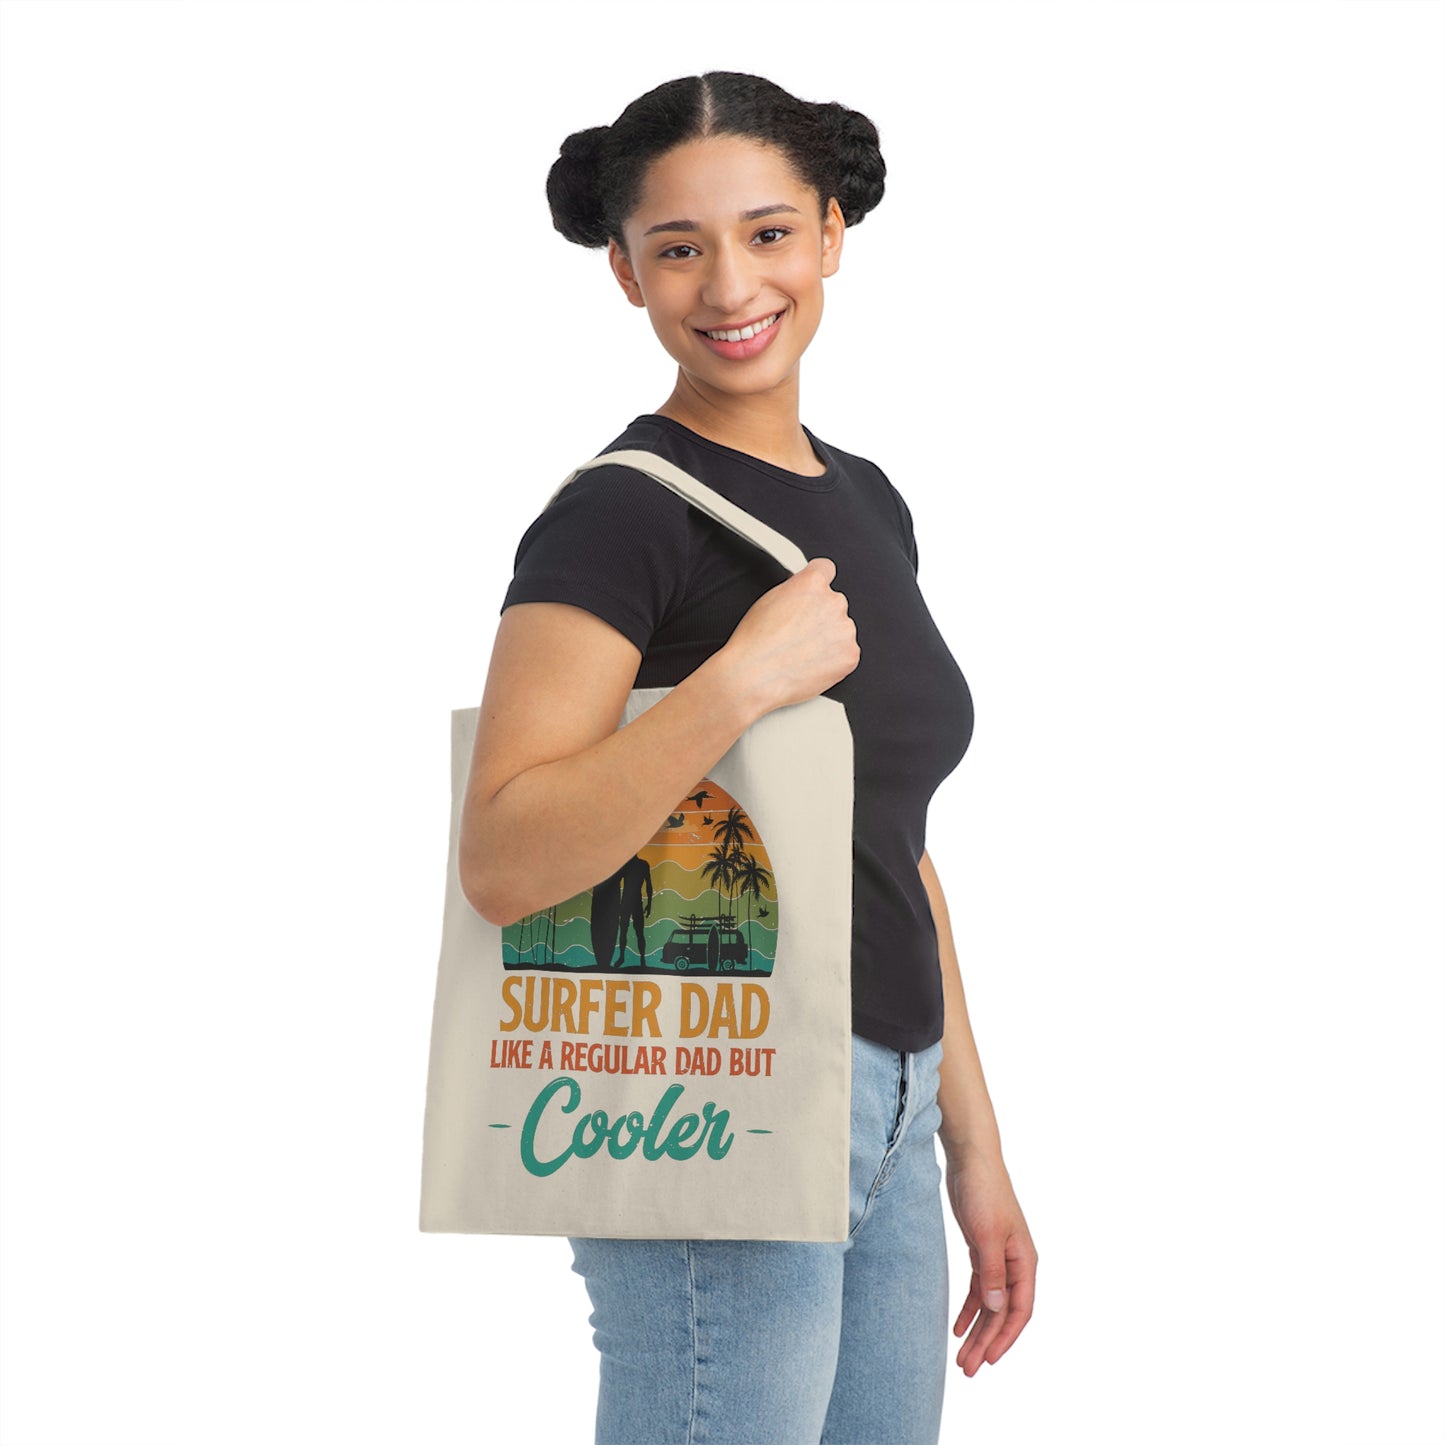 Surfer Dad Cool Canvas Tote Bag